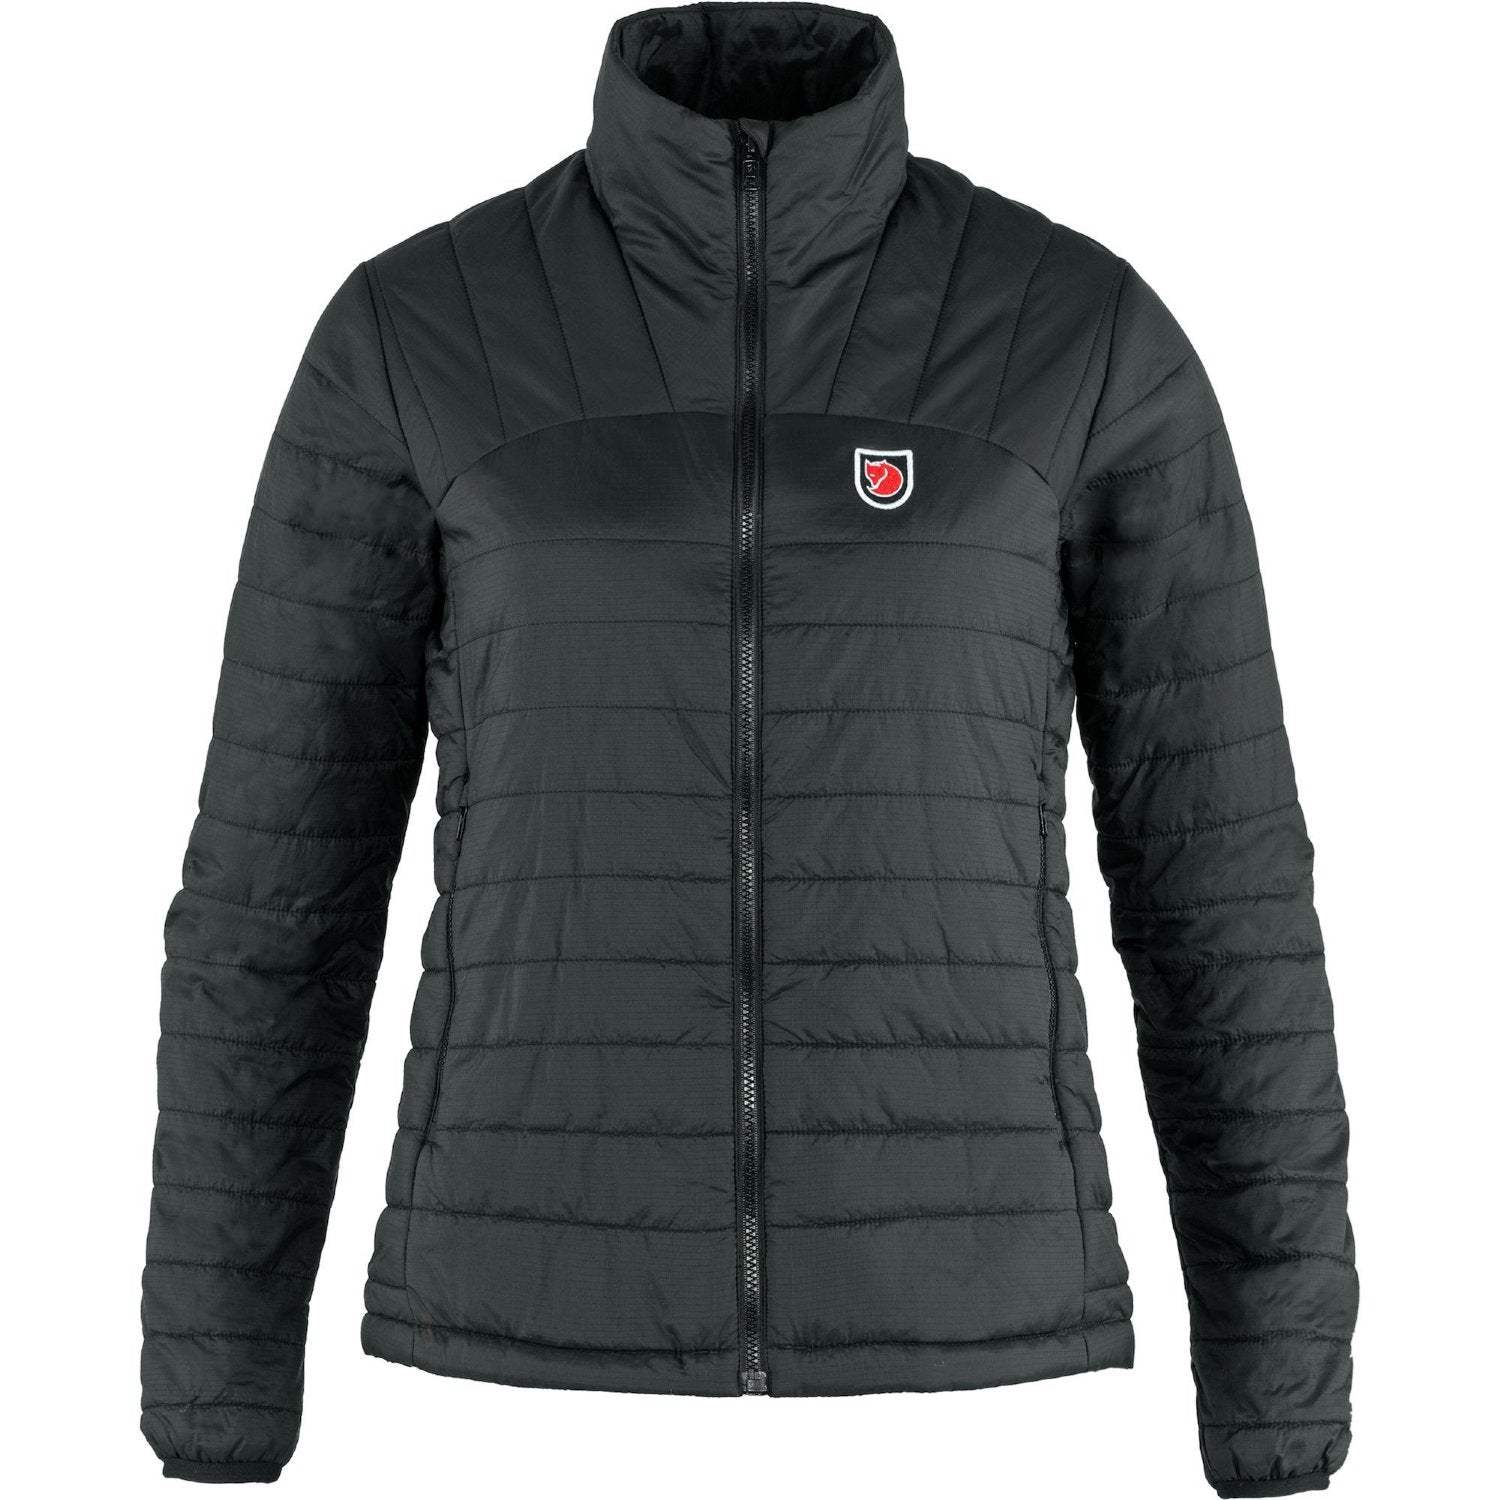 Fjallraven Women's Expedition X-Latt Jacket - The Luxury Promotional Gifts Company Limited